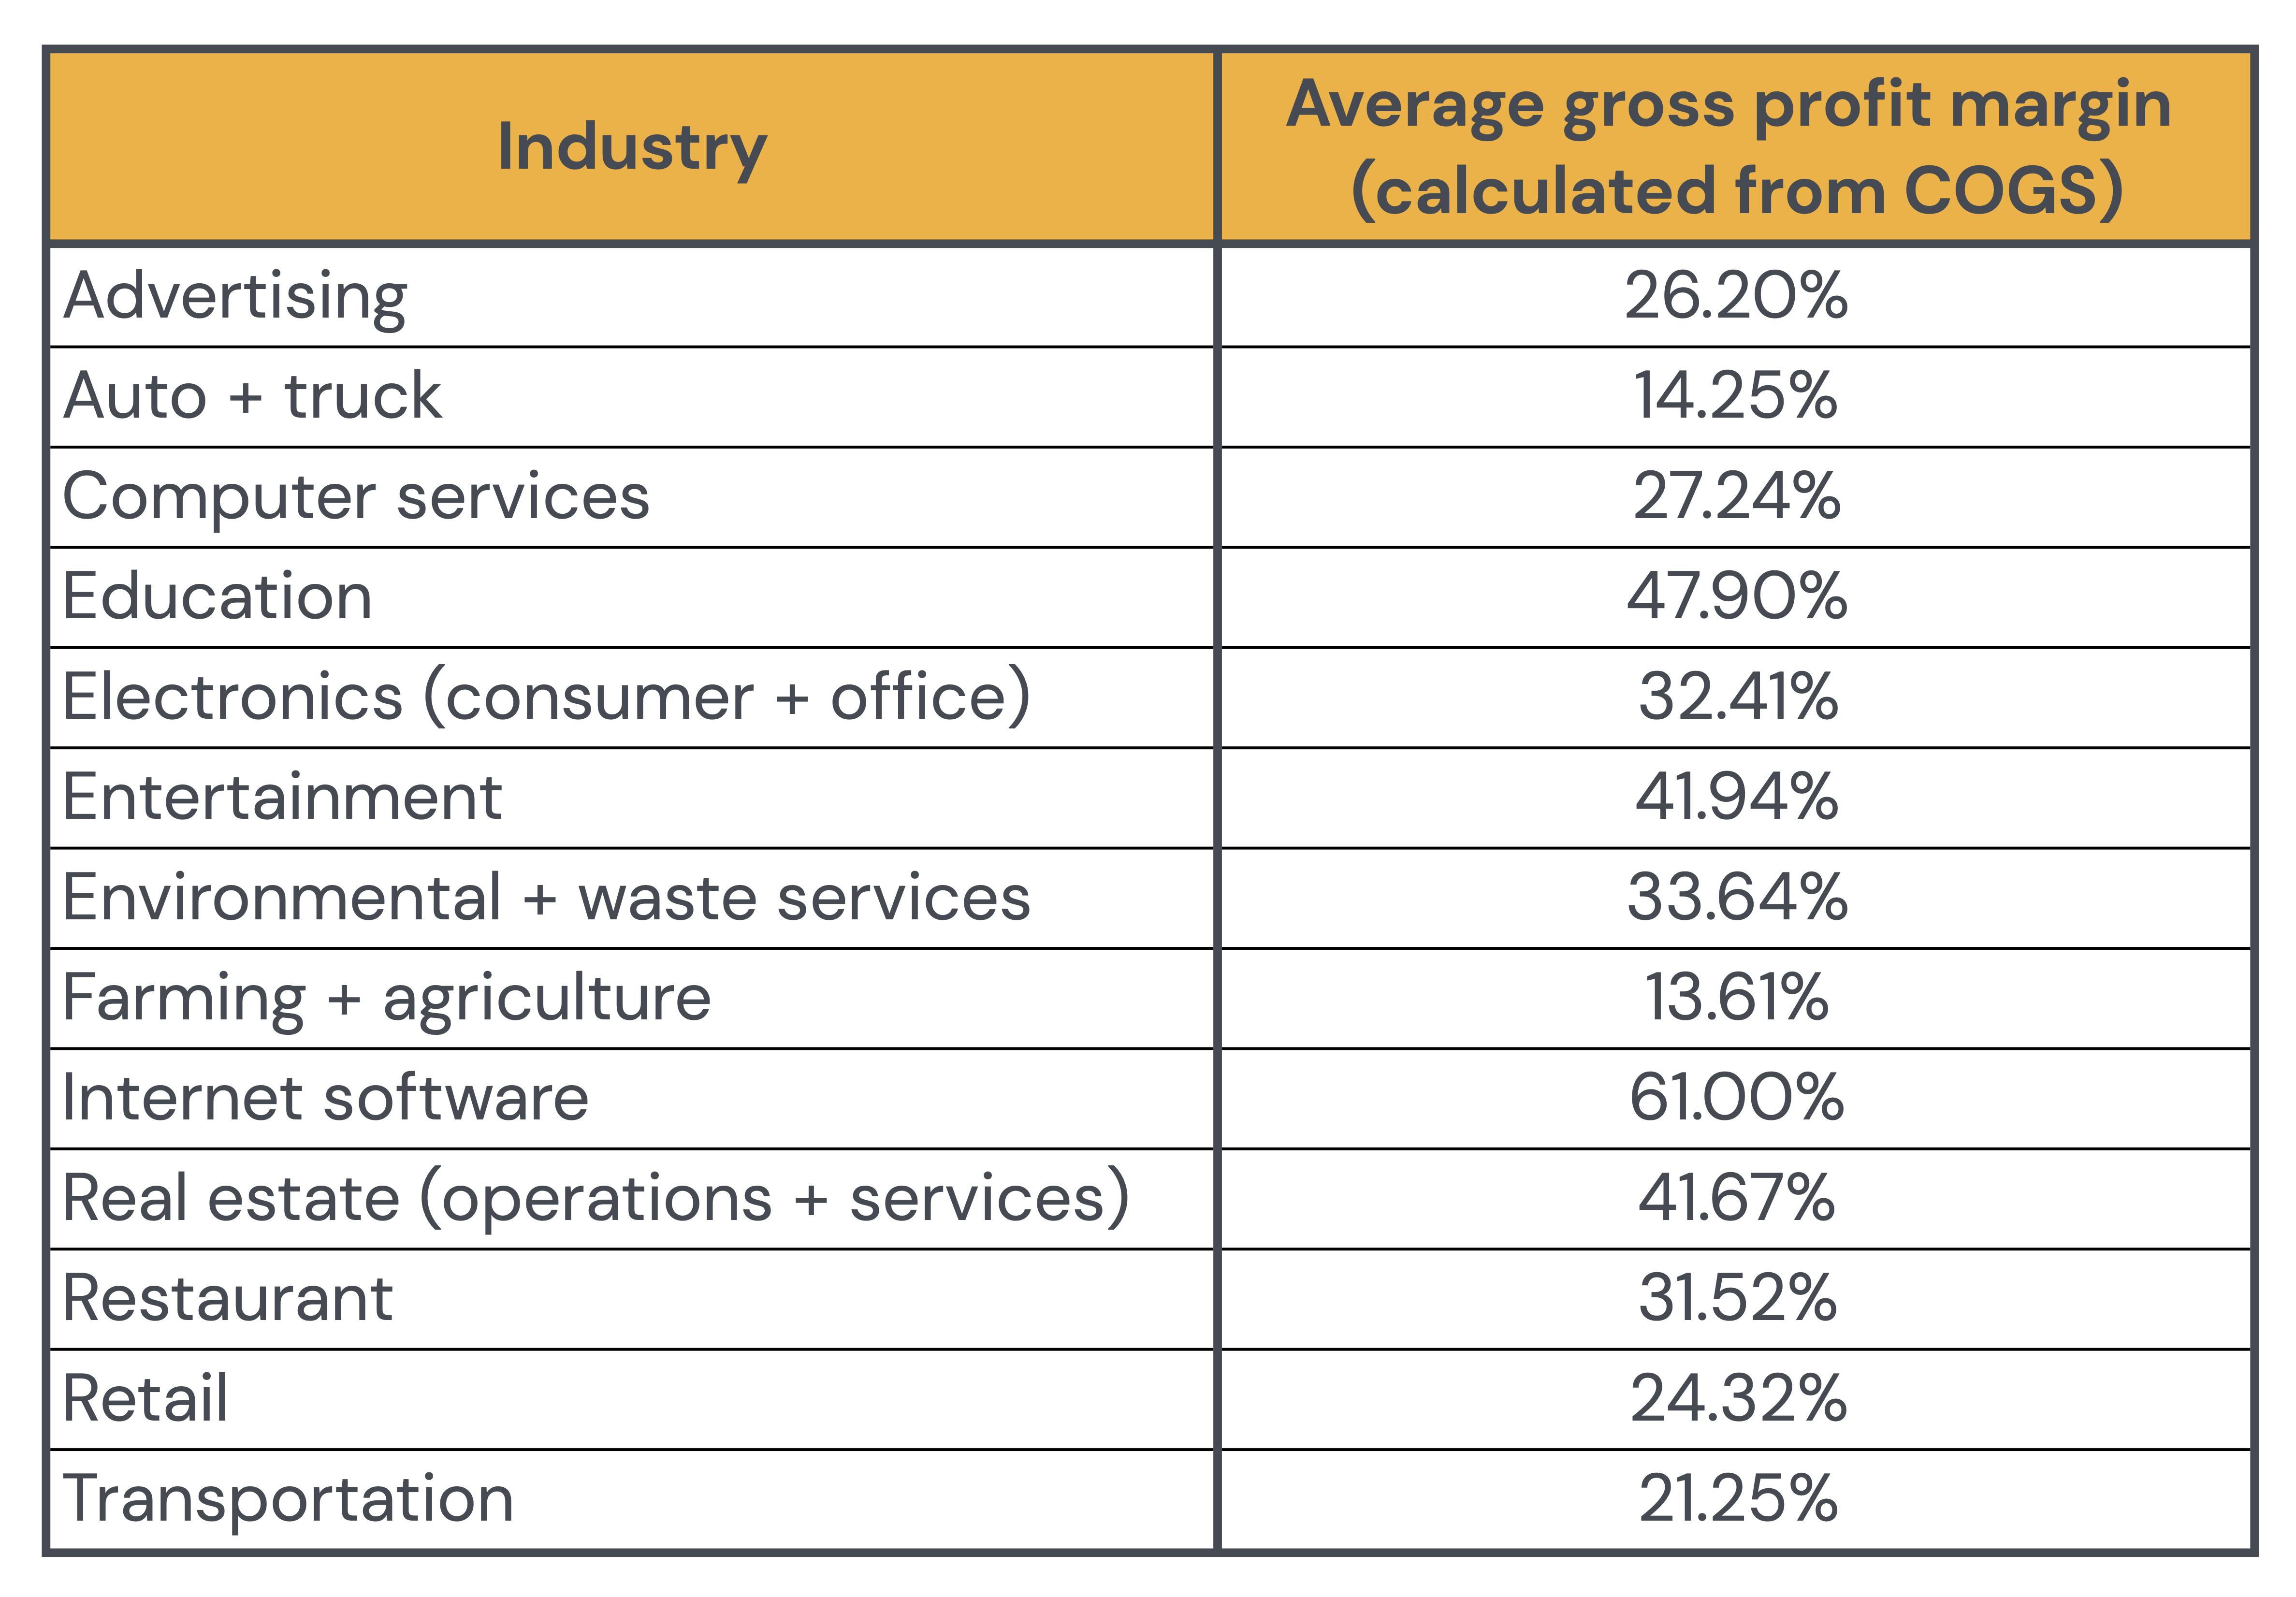 Average gross profit margin as calculated from COGS by Industry